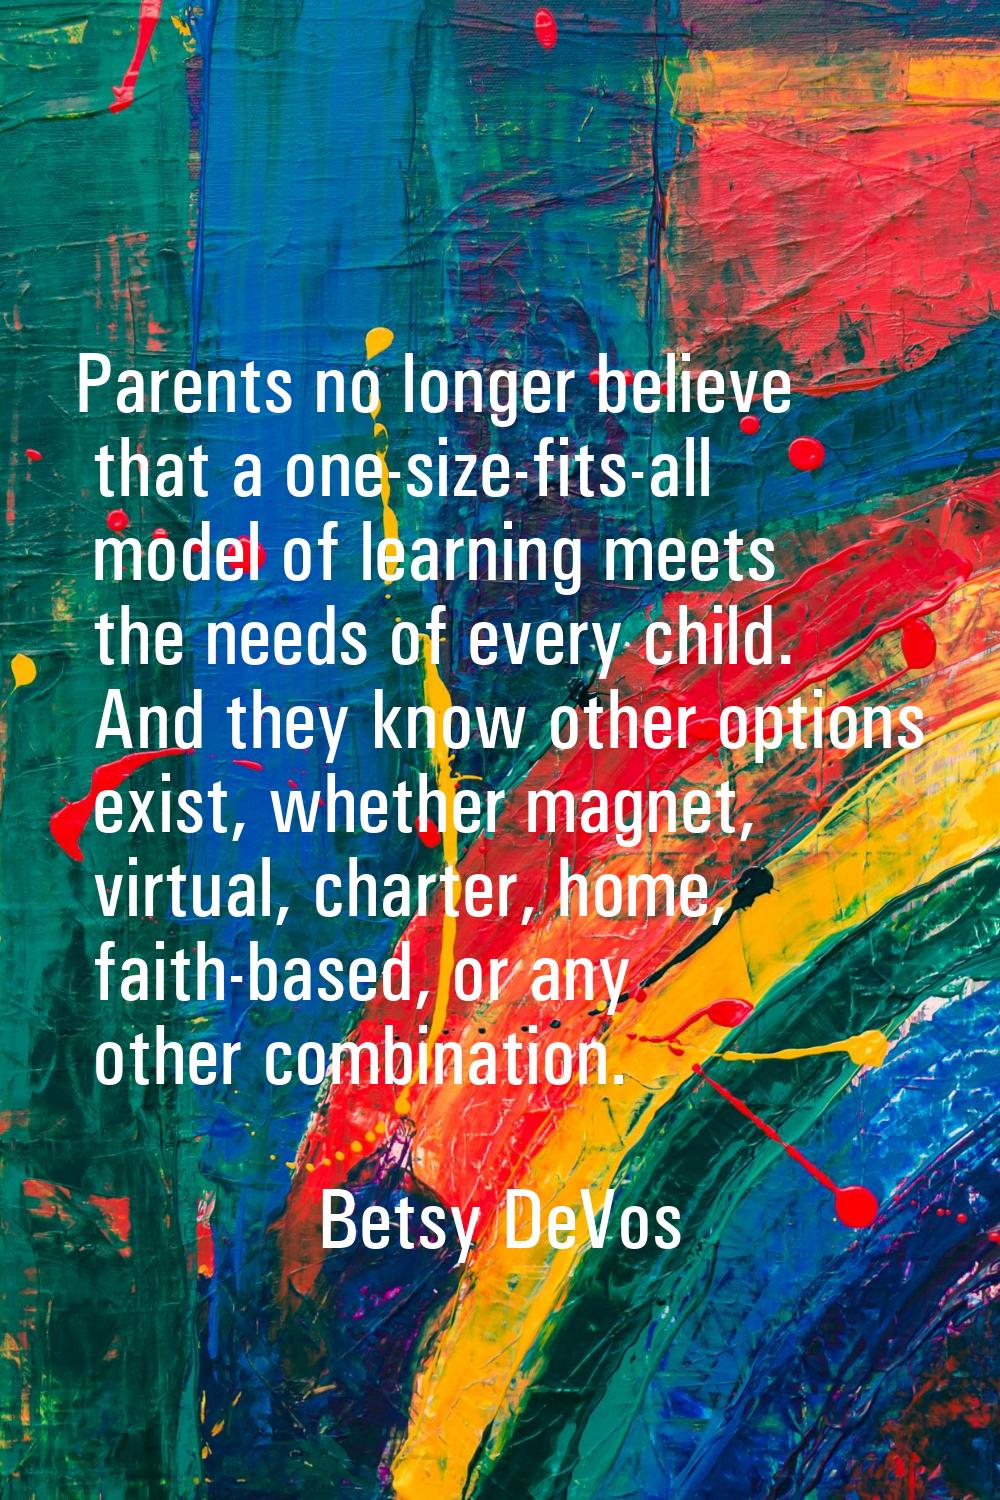 Parents no longer believe that a one-size-fits-all model of learning meets the needs of every child